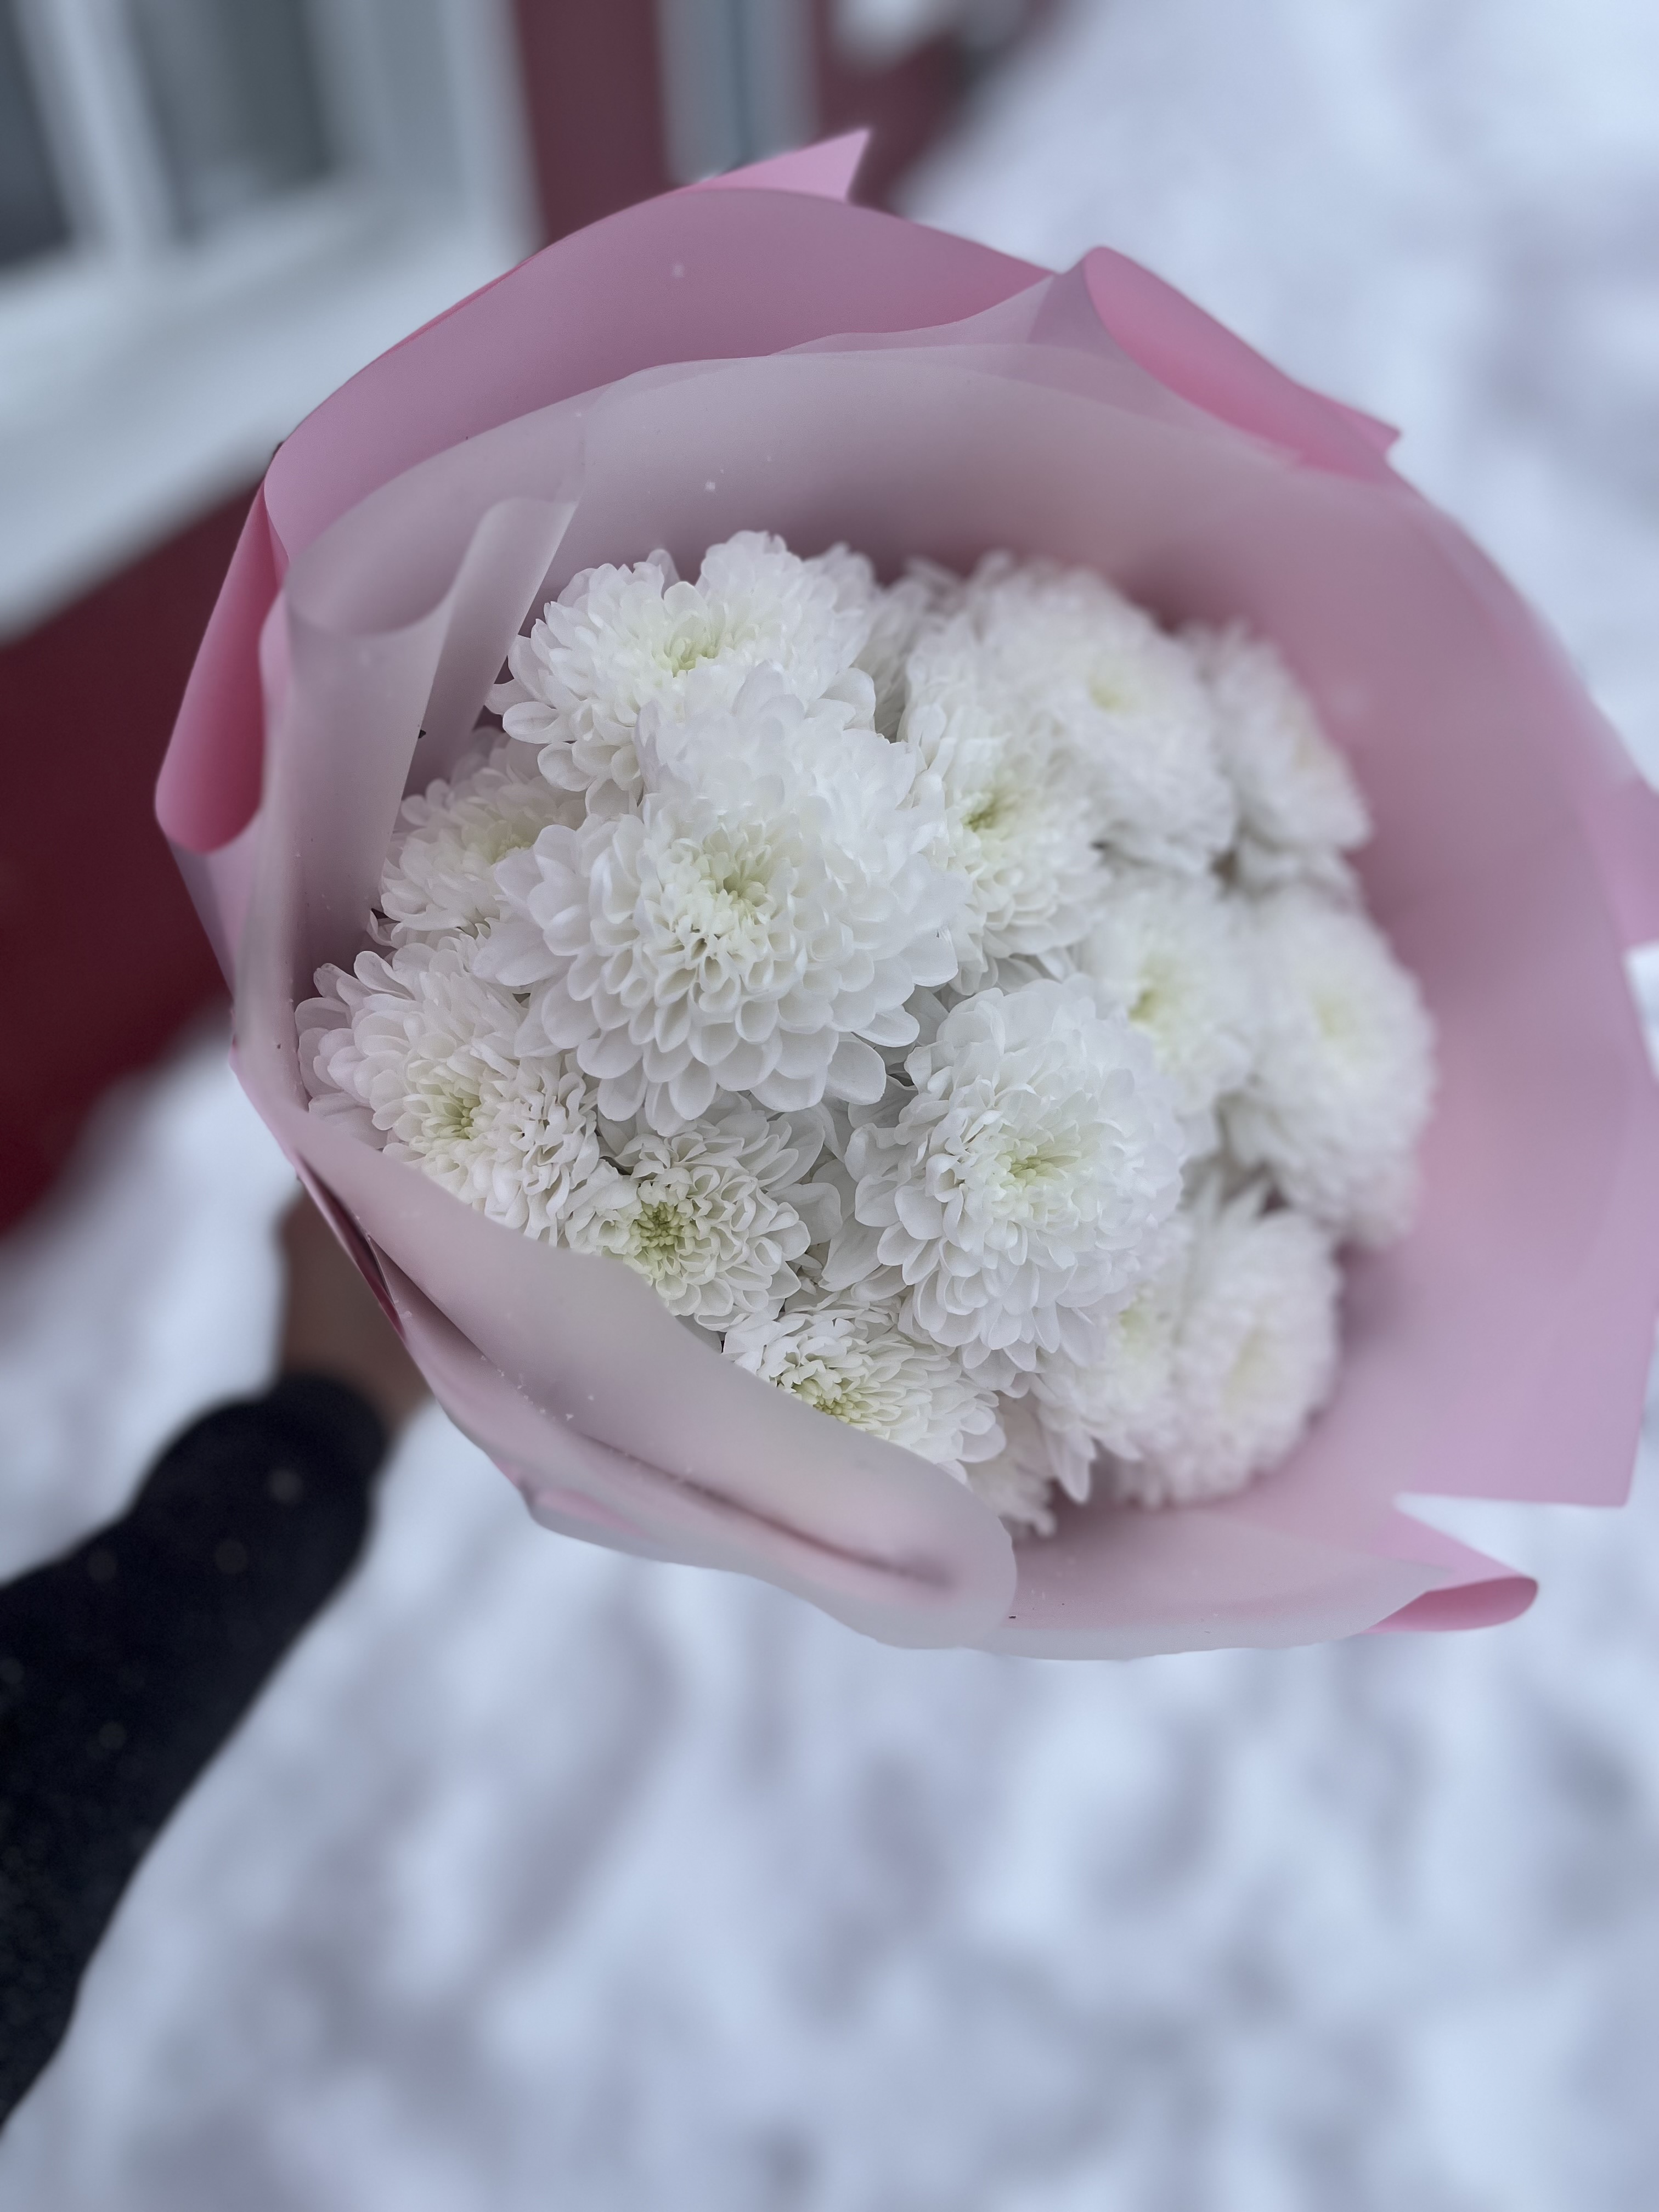 Bouquet of Cloudy flowers delivered to Kostanay.